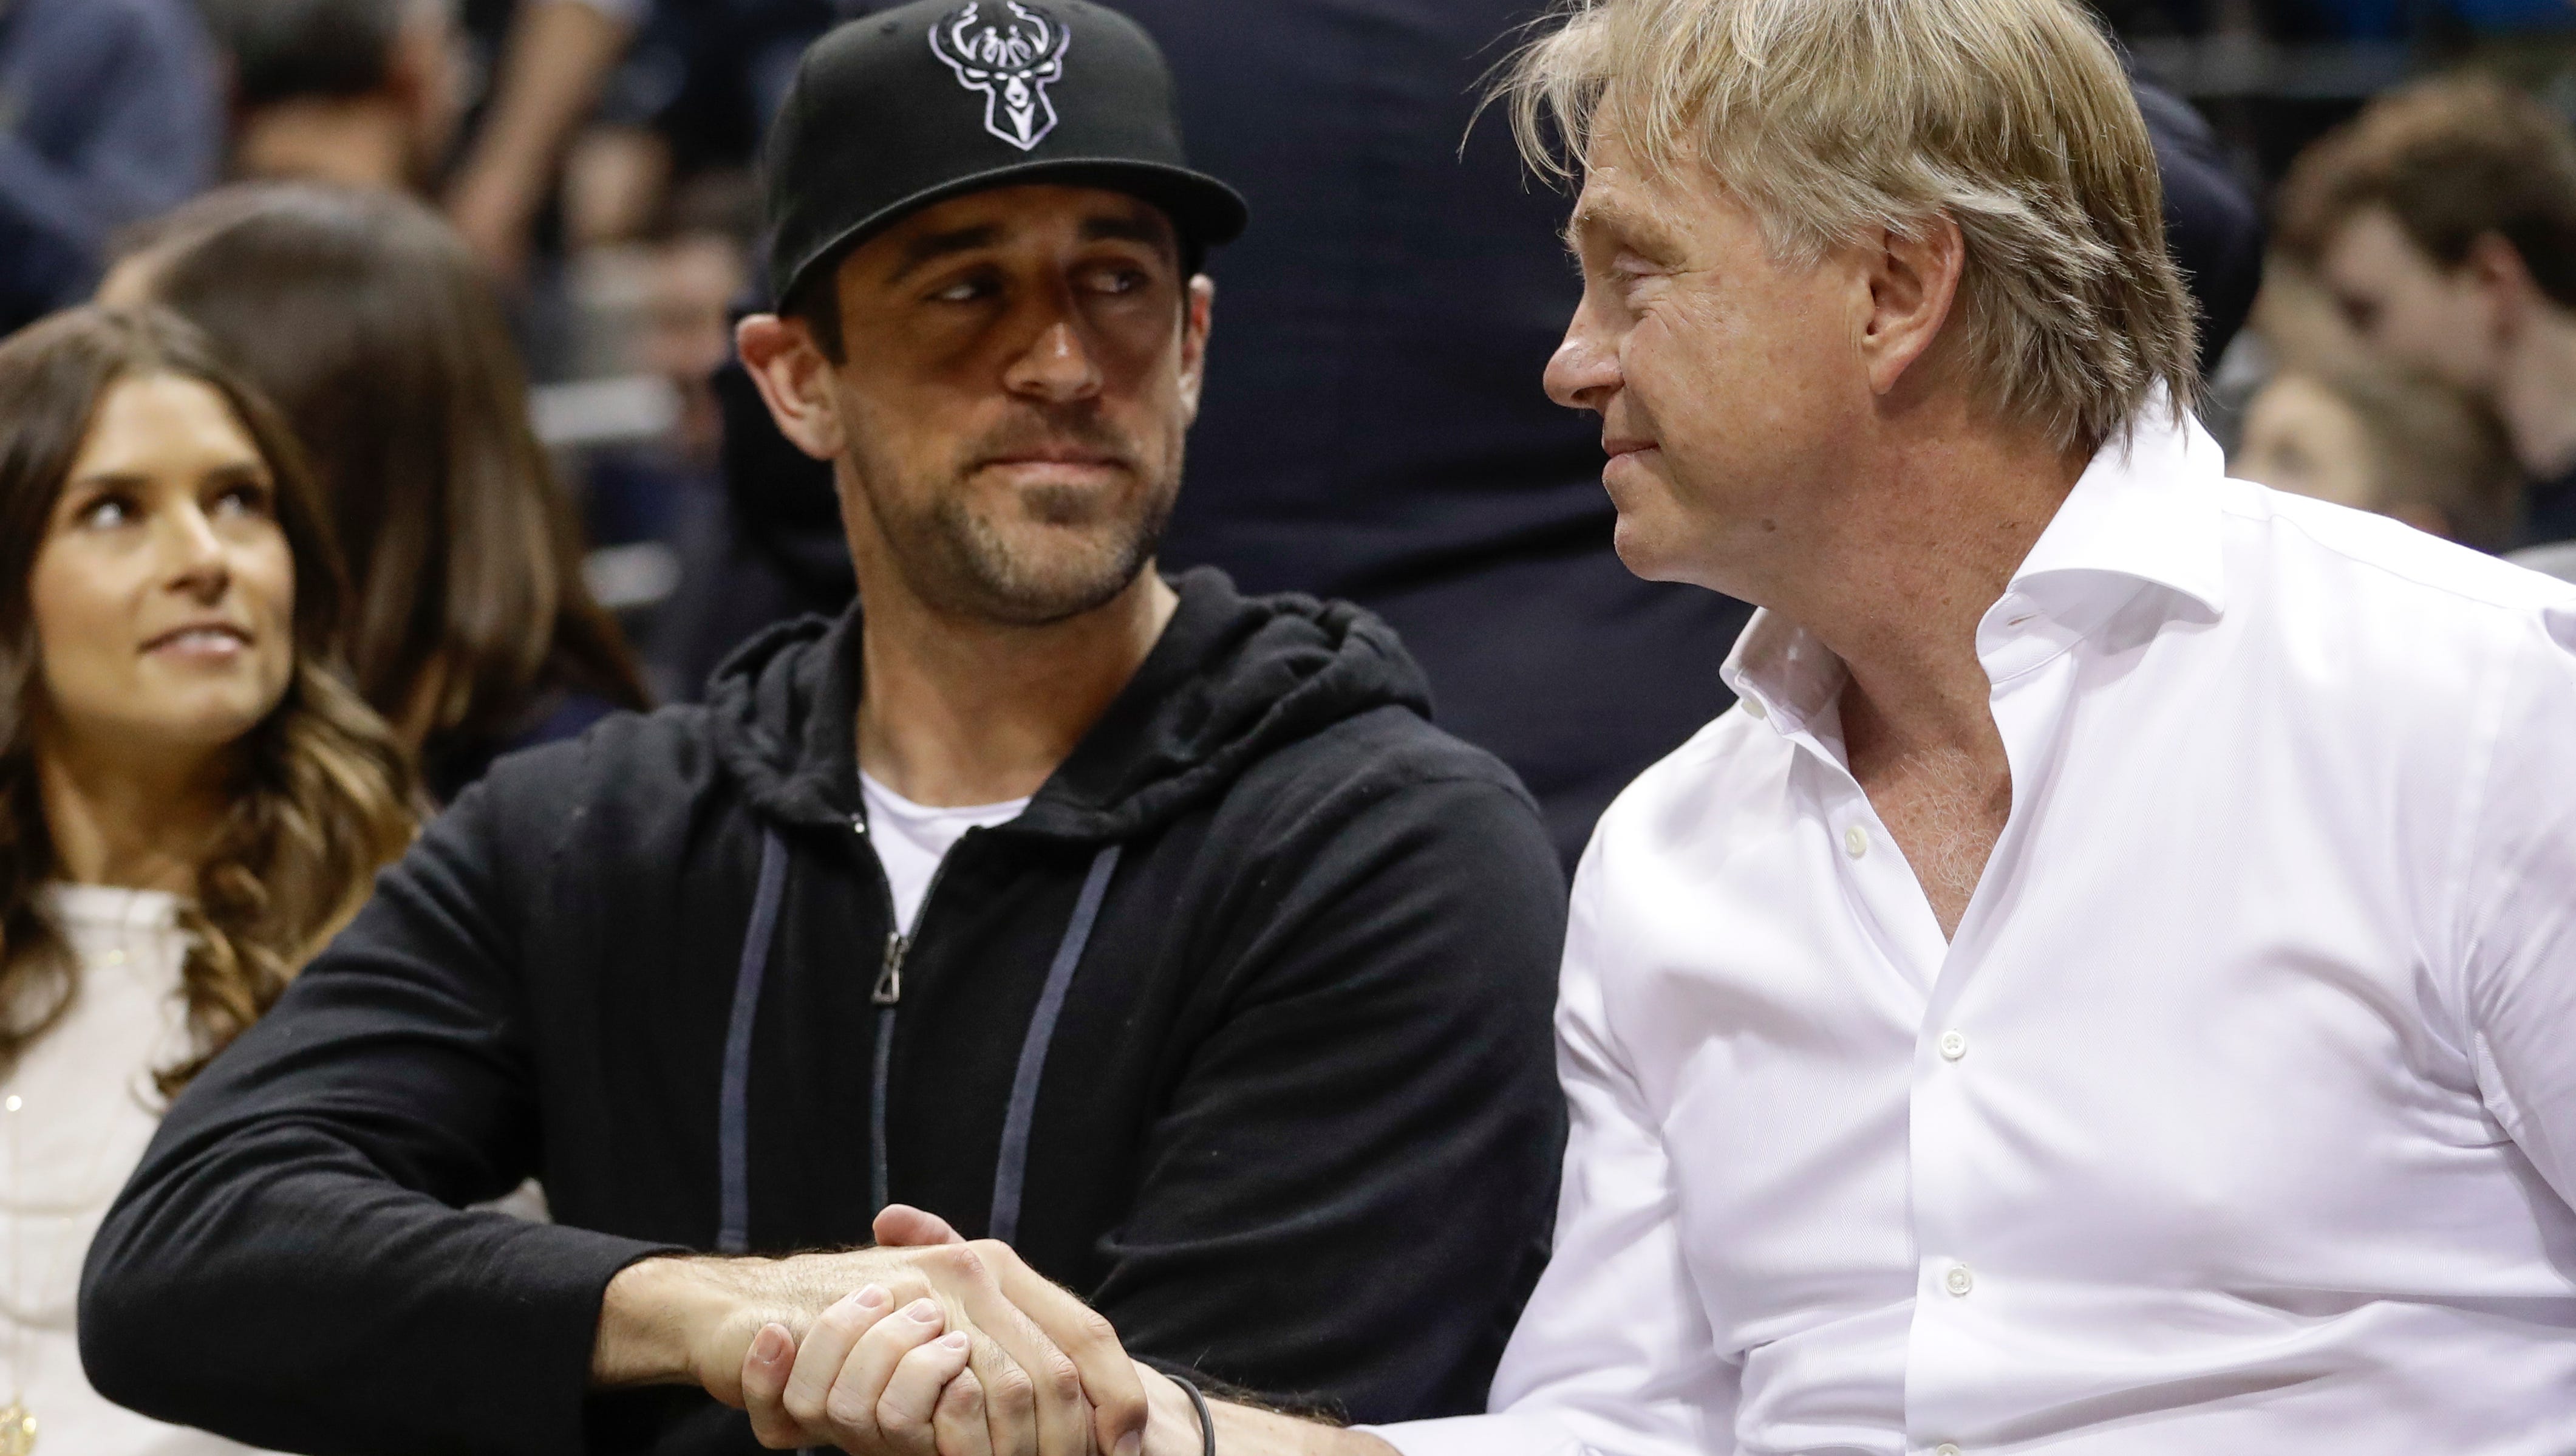 Milwaukee Bucks owner Wes Edens and Green Bay Packers QB Aaron Rodgers shake hands during the Bucks- Celtics game Friday. Rodgers joined the Bucks' ownership group.